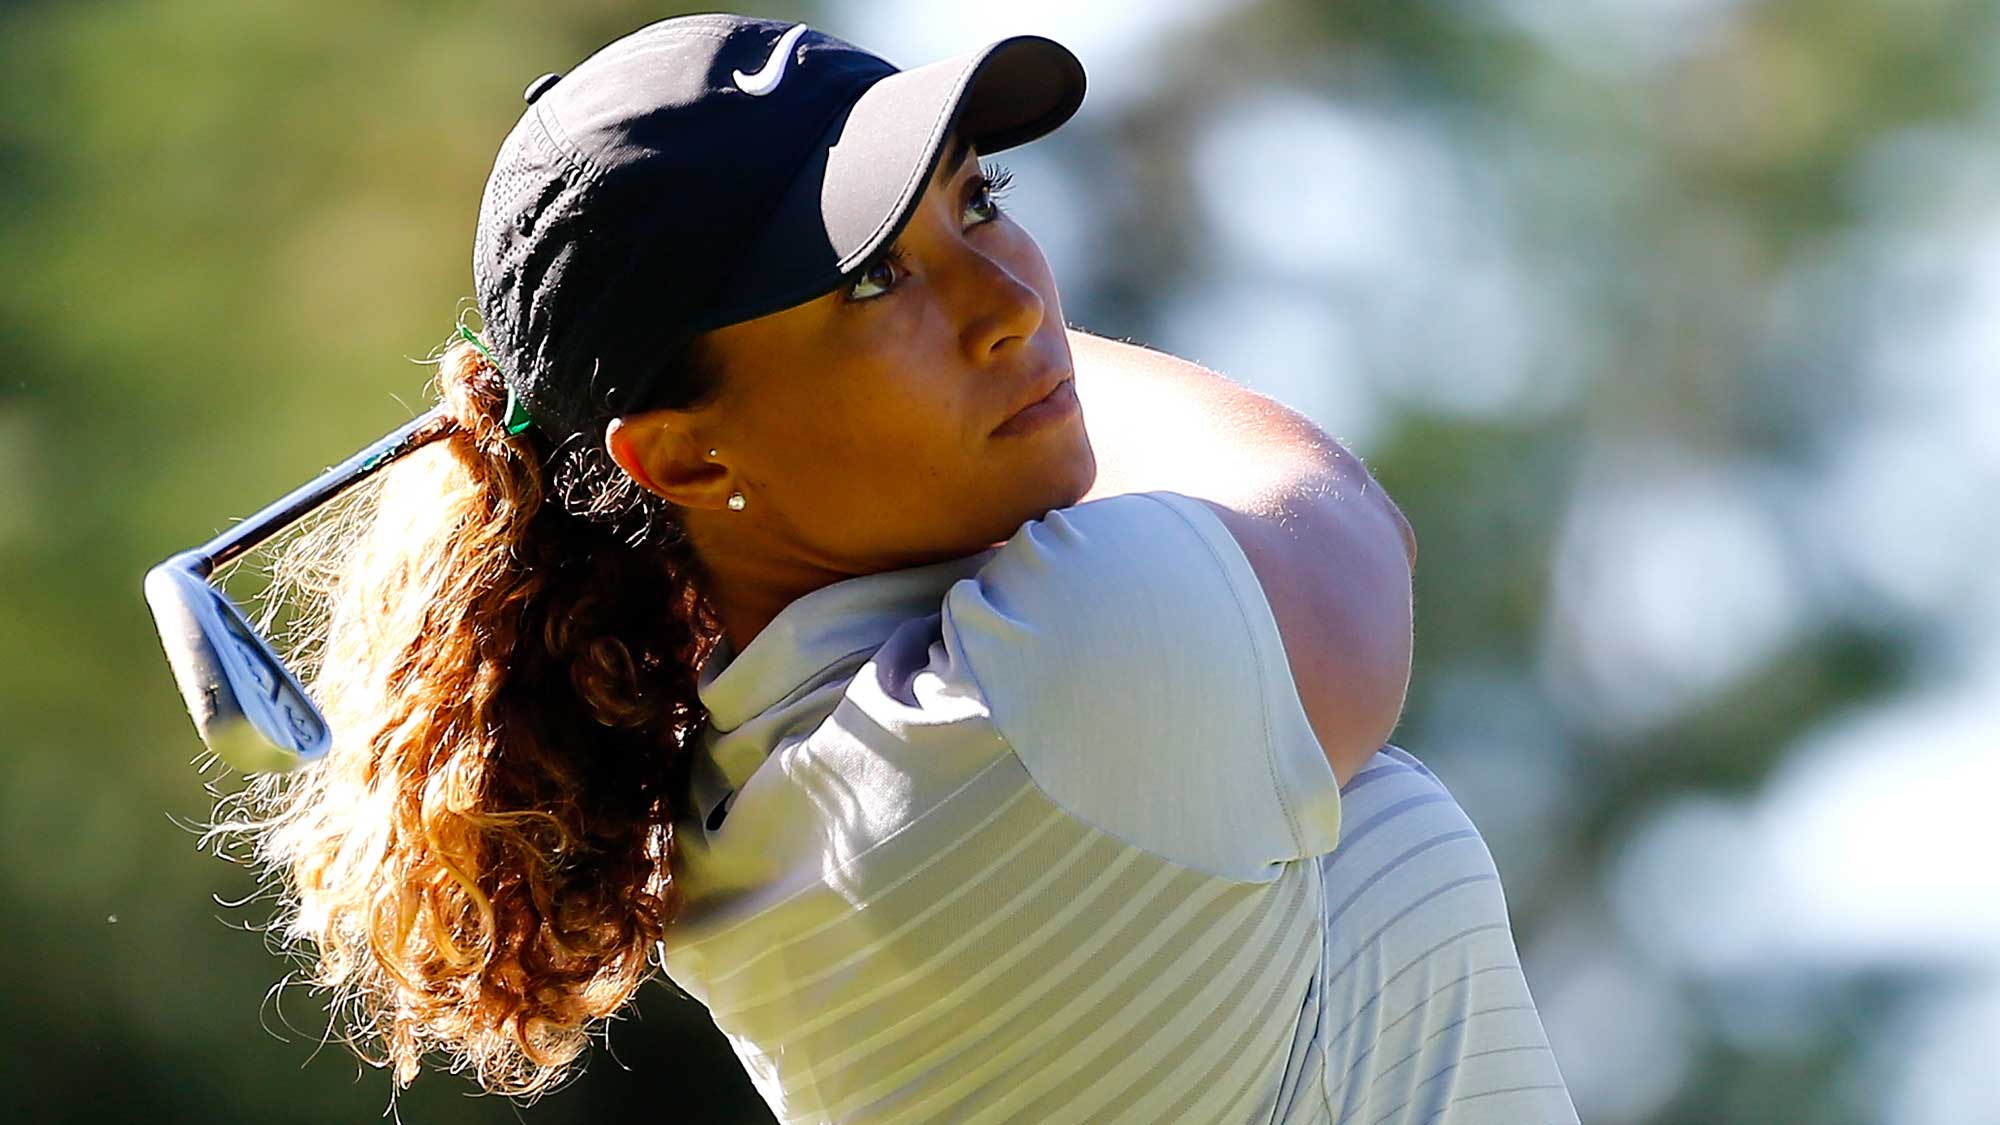 Cheyenne Woods tees off on the 18th hole during the second round of the LPGA Cambia Portland Classic